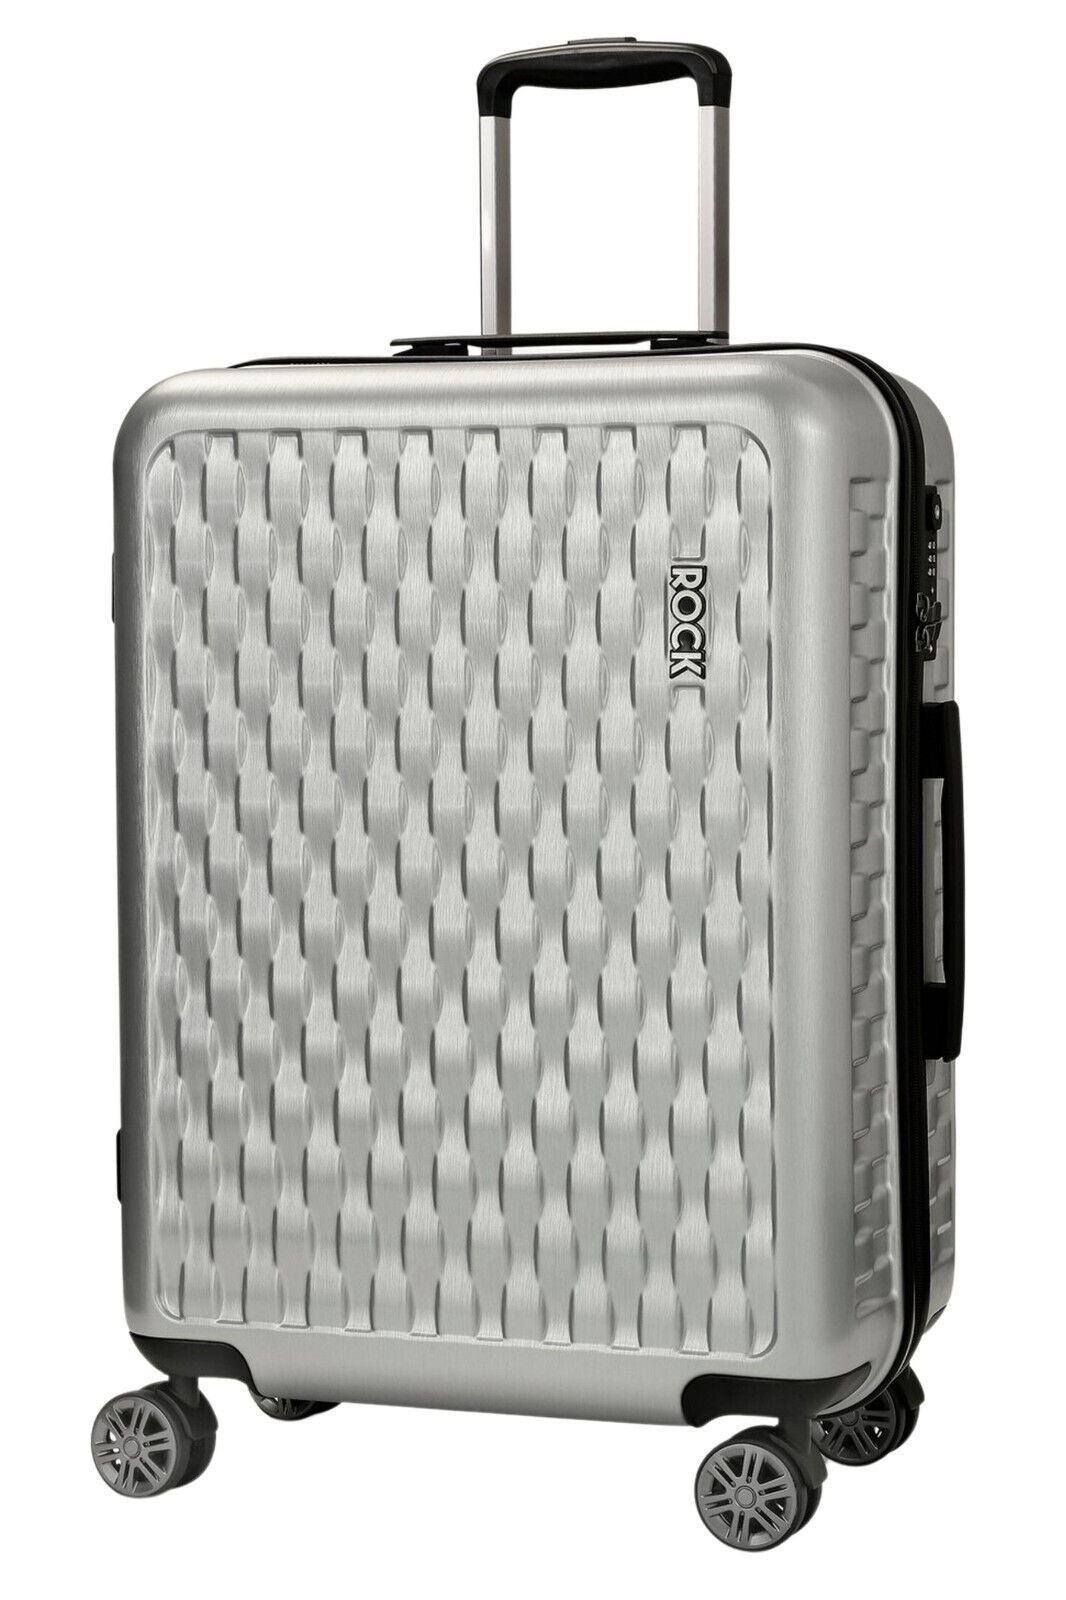 Hard Shell Silver Suitcase Set 8 Wheel Luggage Trolley Case Holiday Travel Bag